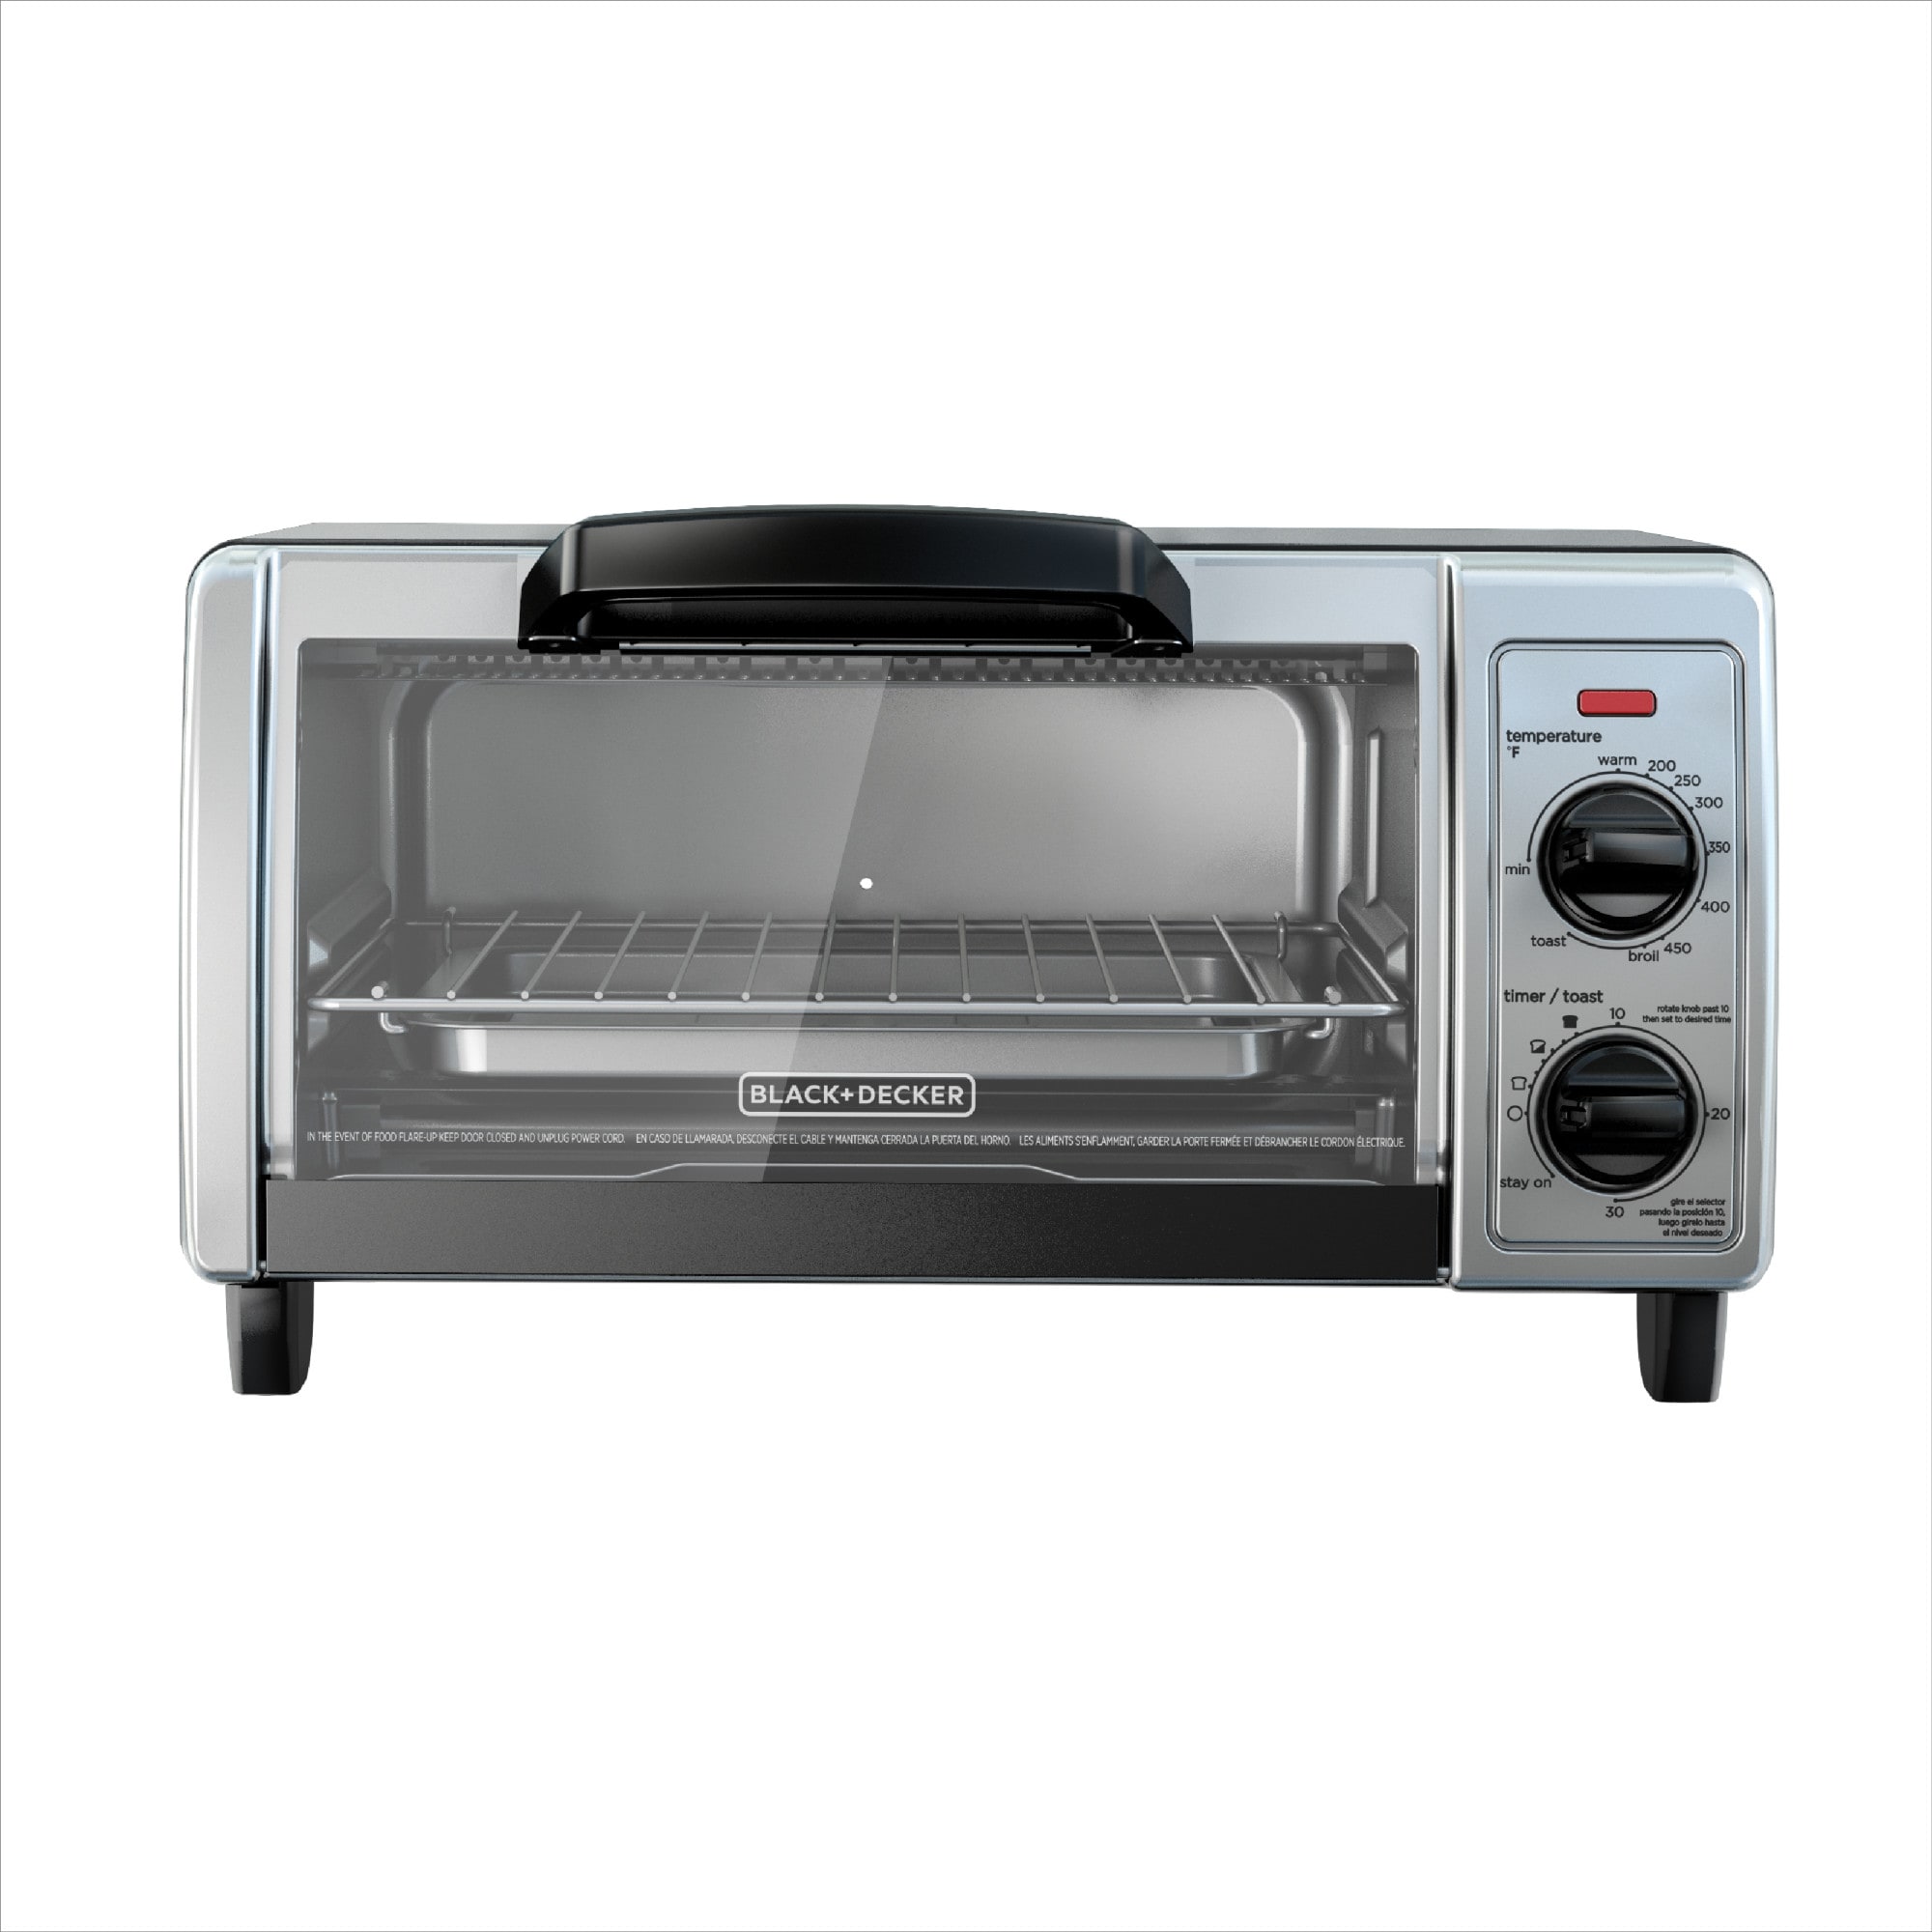 Black & Decker Toaster Oven and Kenmore Microwave - Roller Auctions